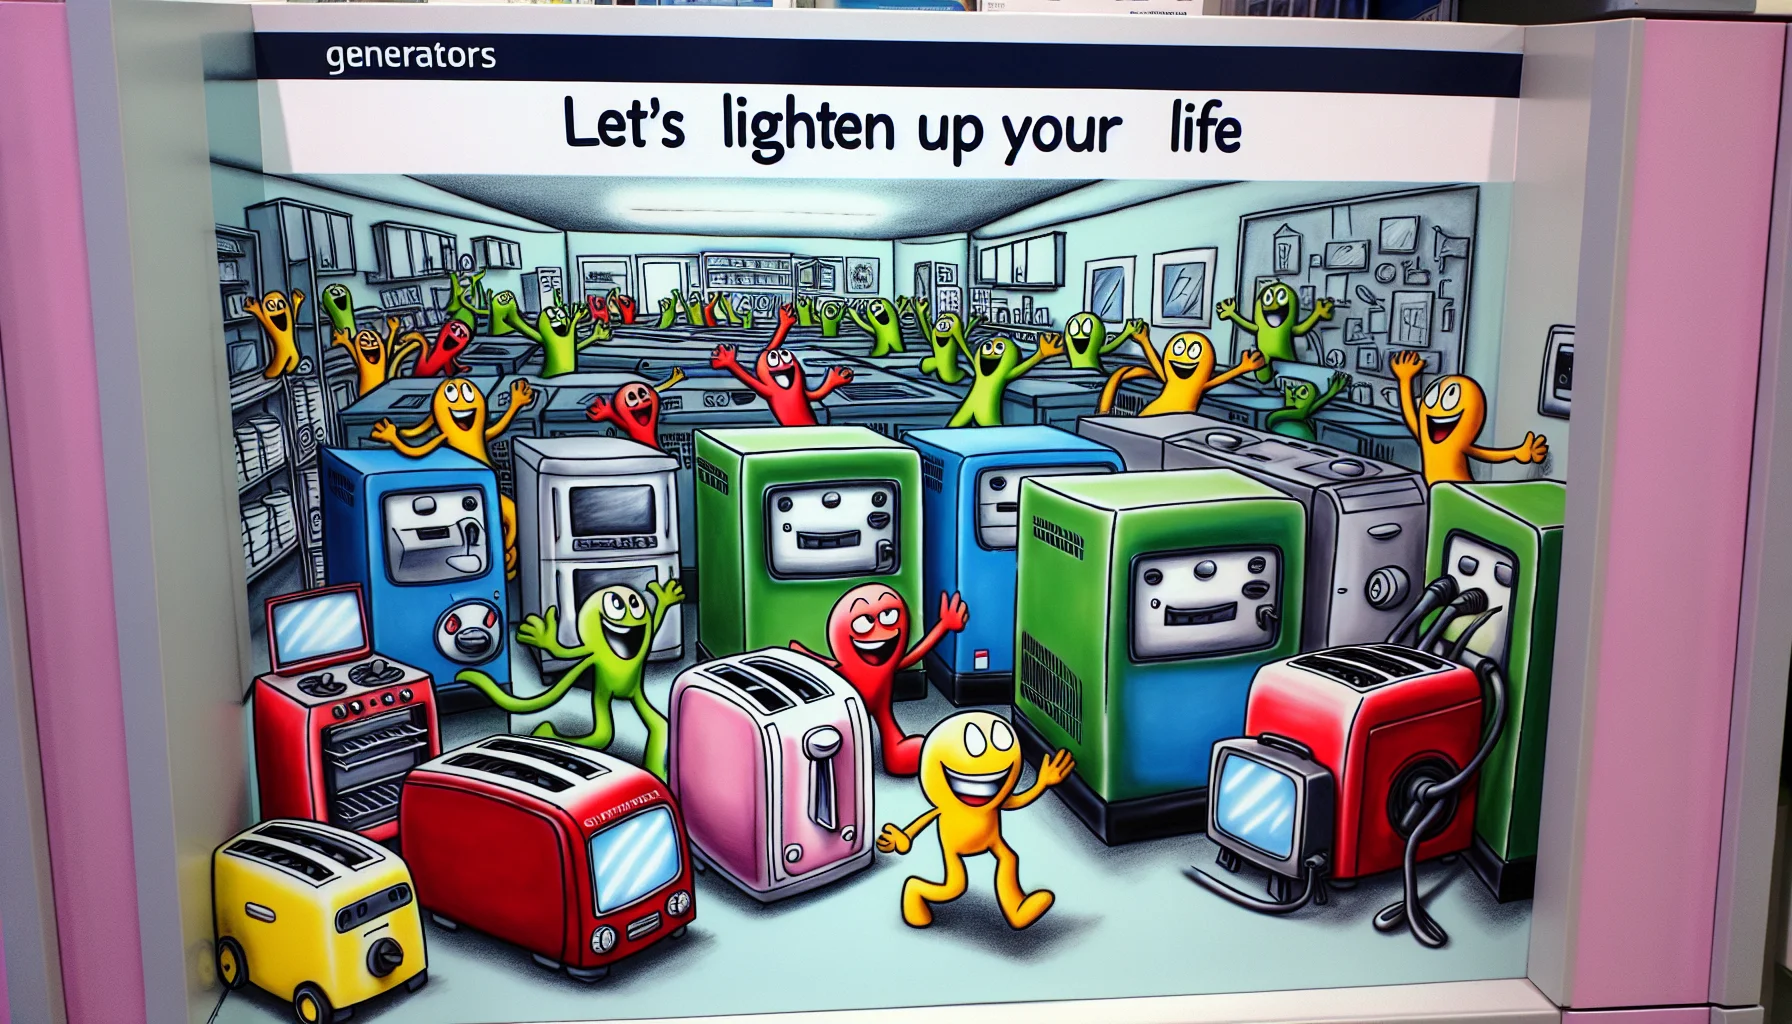 Imagine a humorous scene in a home energy supply store. In the dedicated 'Generators' section, there's a display for the 'Home Power Generation' category. Picture a playful sign that says, 'Let's lighten up your life' along with an army of cartoonish, joyful generator characters. These generators, depicted in various colors, are performing a lively dance, whilst producing electricity to power an array of home appliances, such as televisions, toasters, and lighting fixtures. The appliances are animated as well, showcasing their functionalities in an amusingly exaggerated manner.